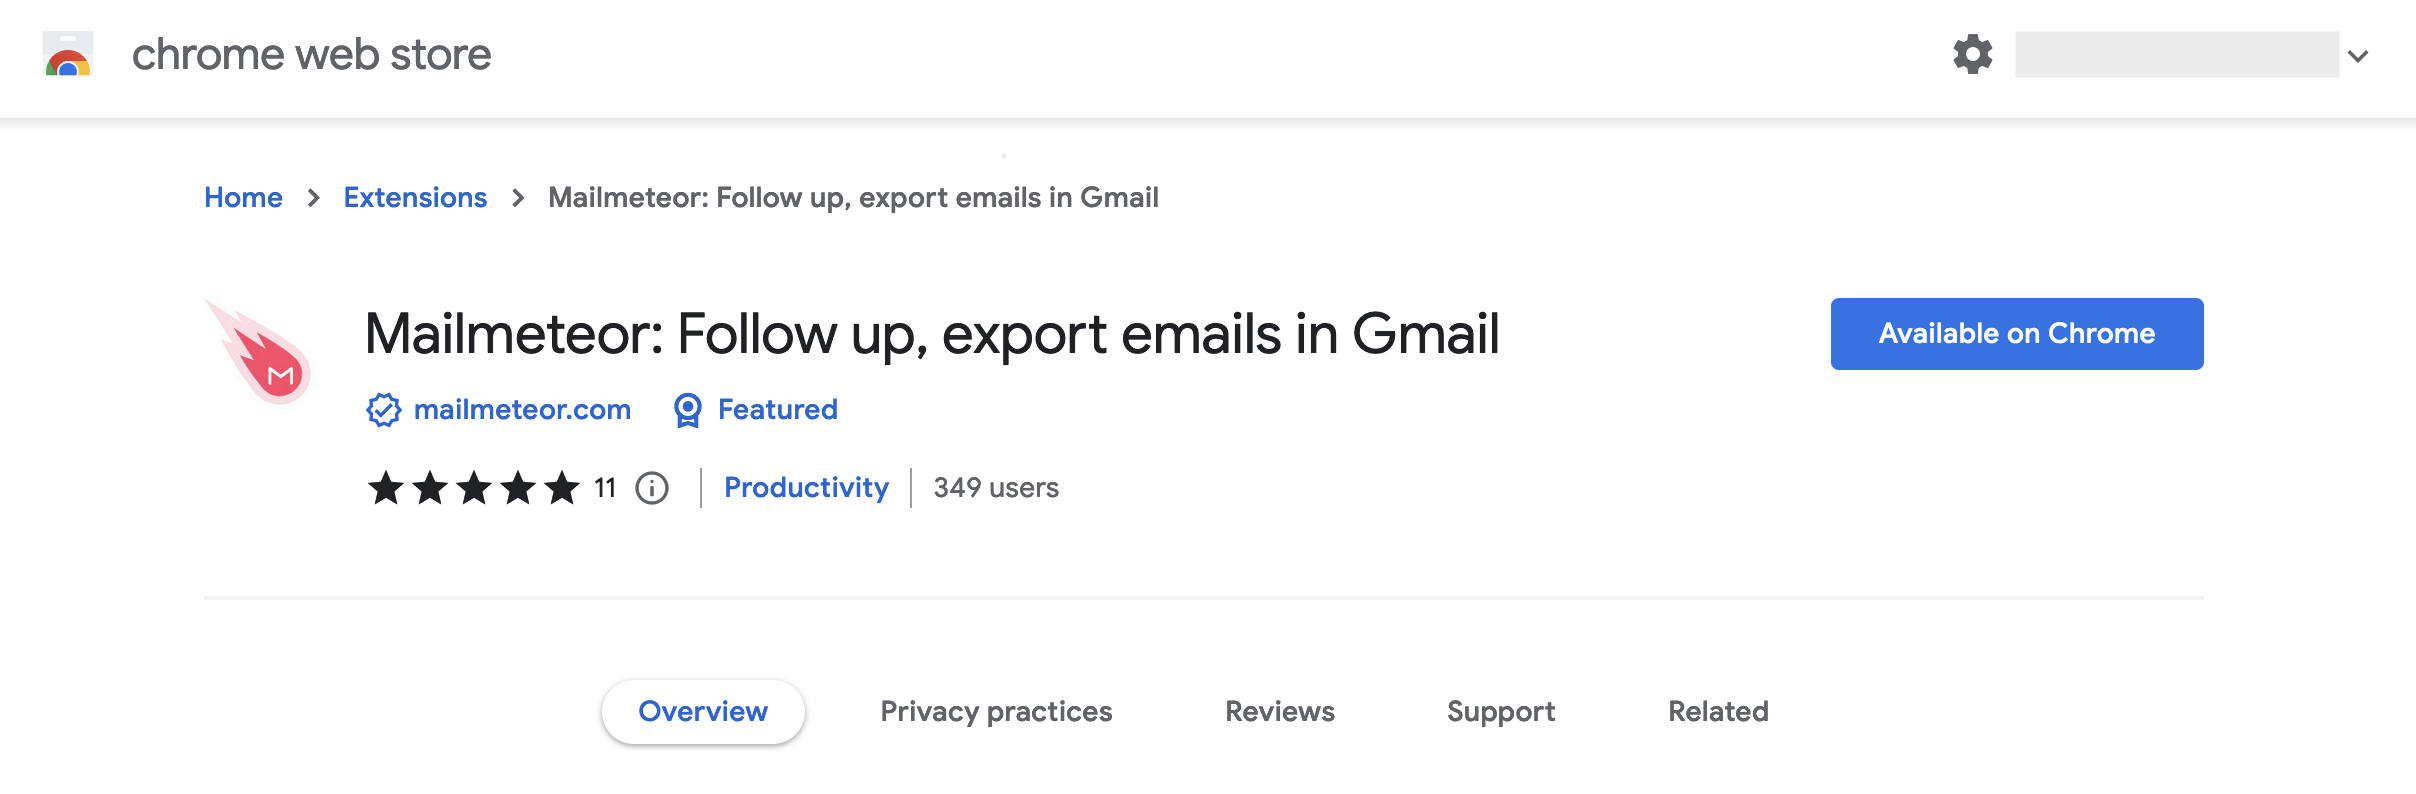 Mailmeteor for Gmail - Chrome Webstore Listing page